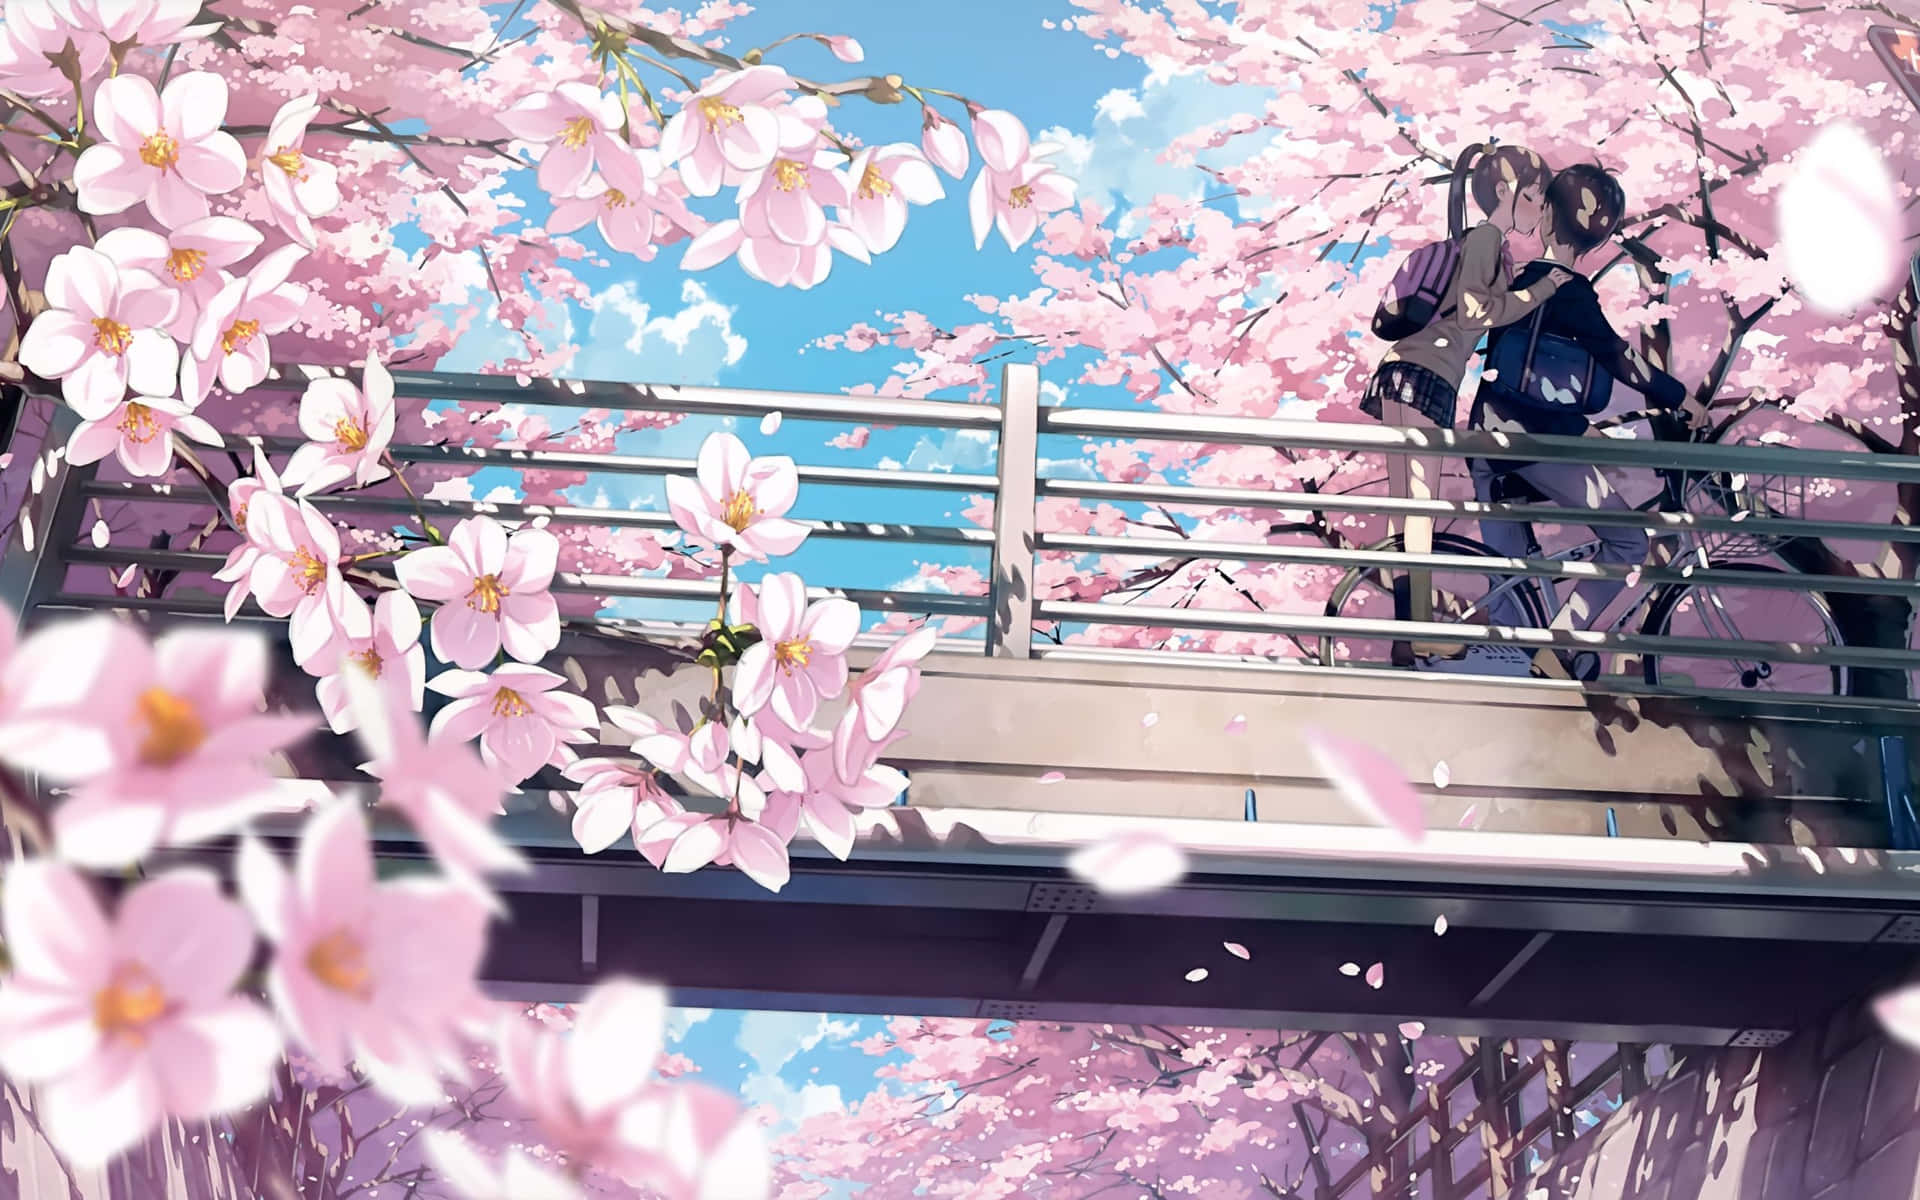 Download Enjoy the beauty of a cherry blossom-filled landscape with this  peaceful anime scenery. Wallpaper 